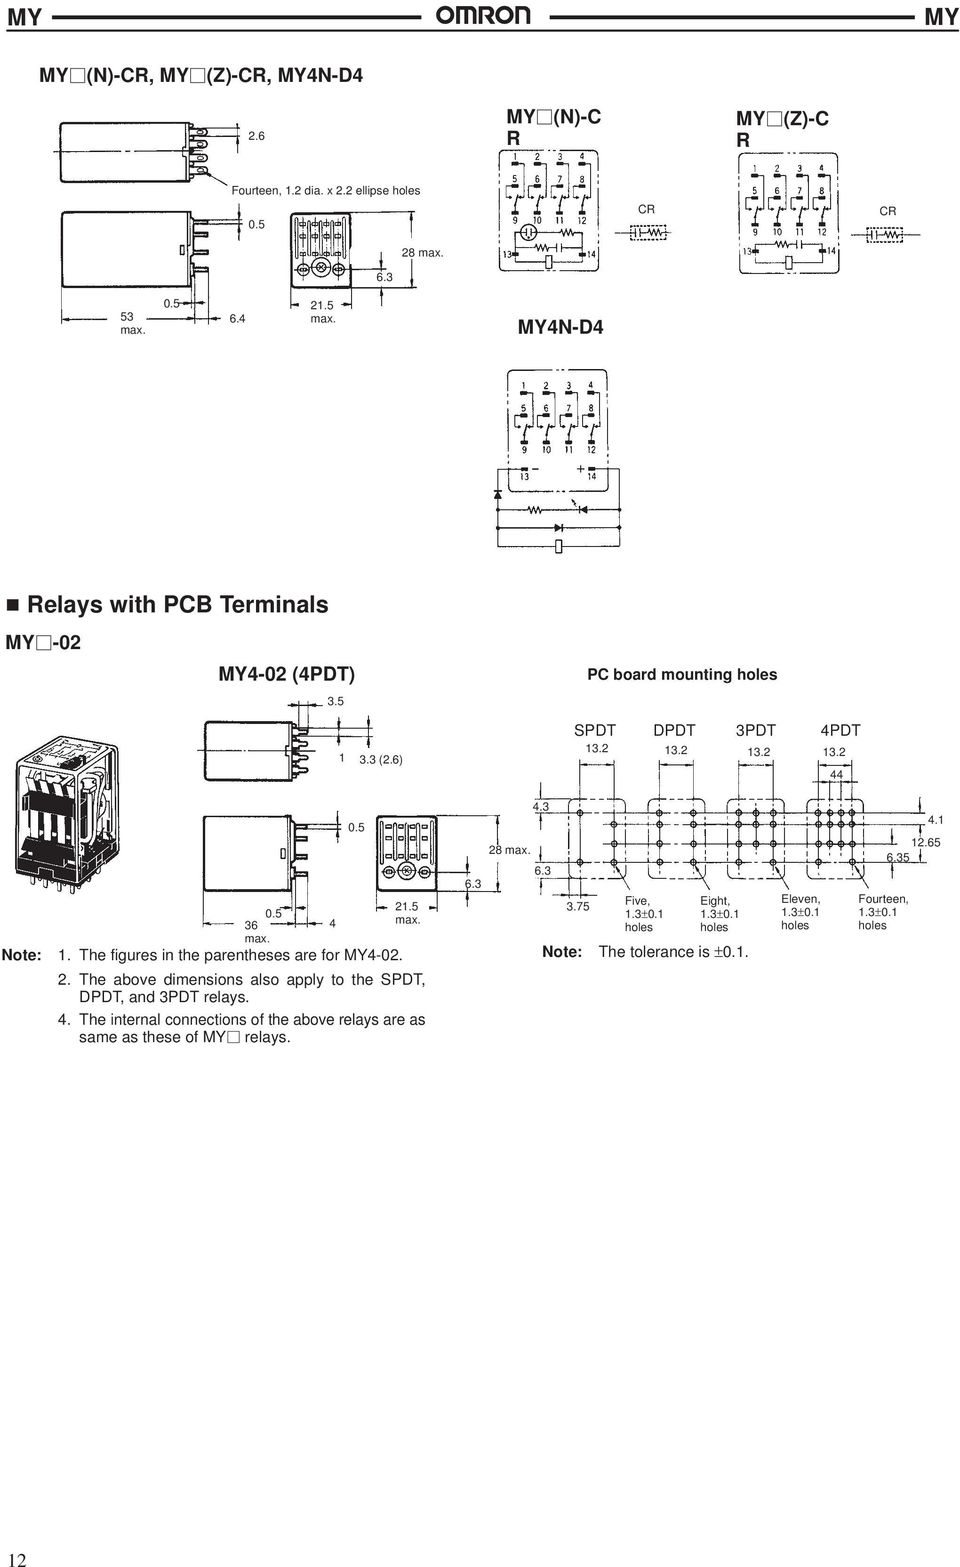 The figures in the parentheses are for 4-02. 2. The above dimensions also apply to the SPDT, DPDT, and PDT relays. 4. The internal connections of the above relays are as same as these of relays.